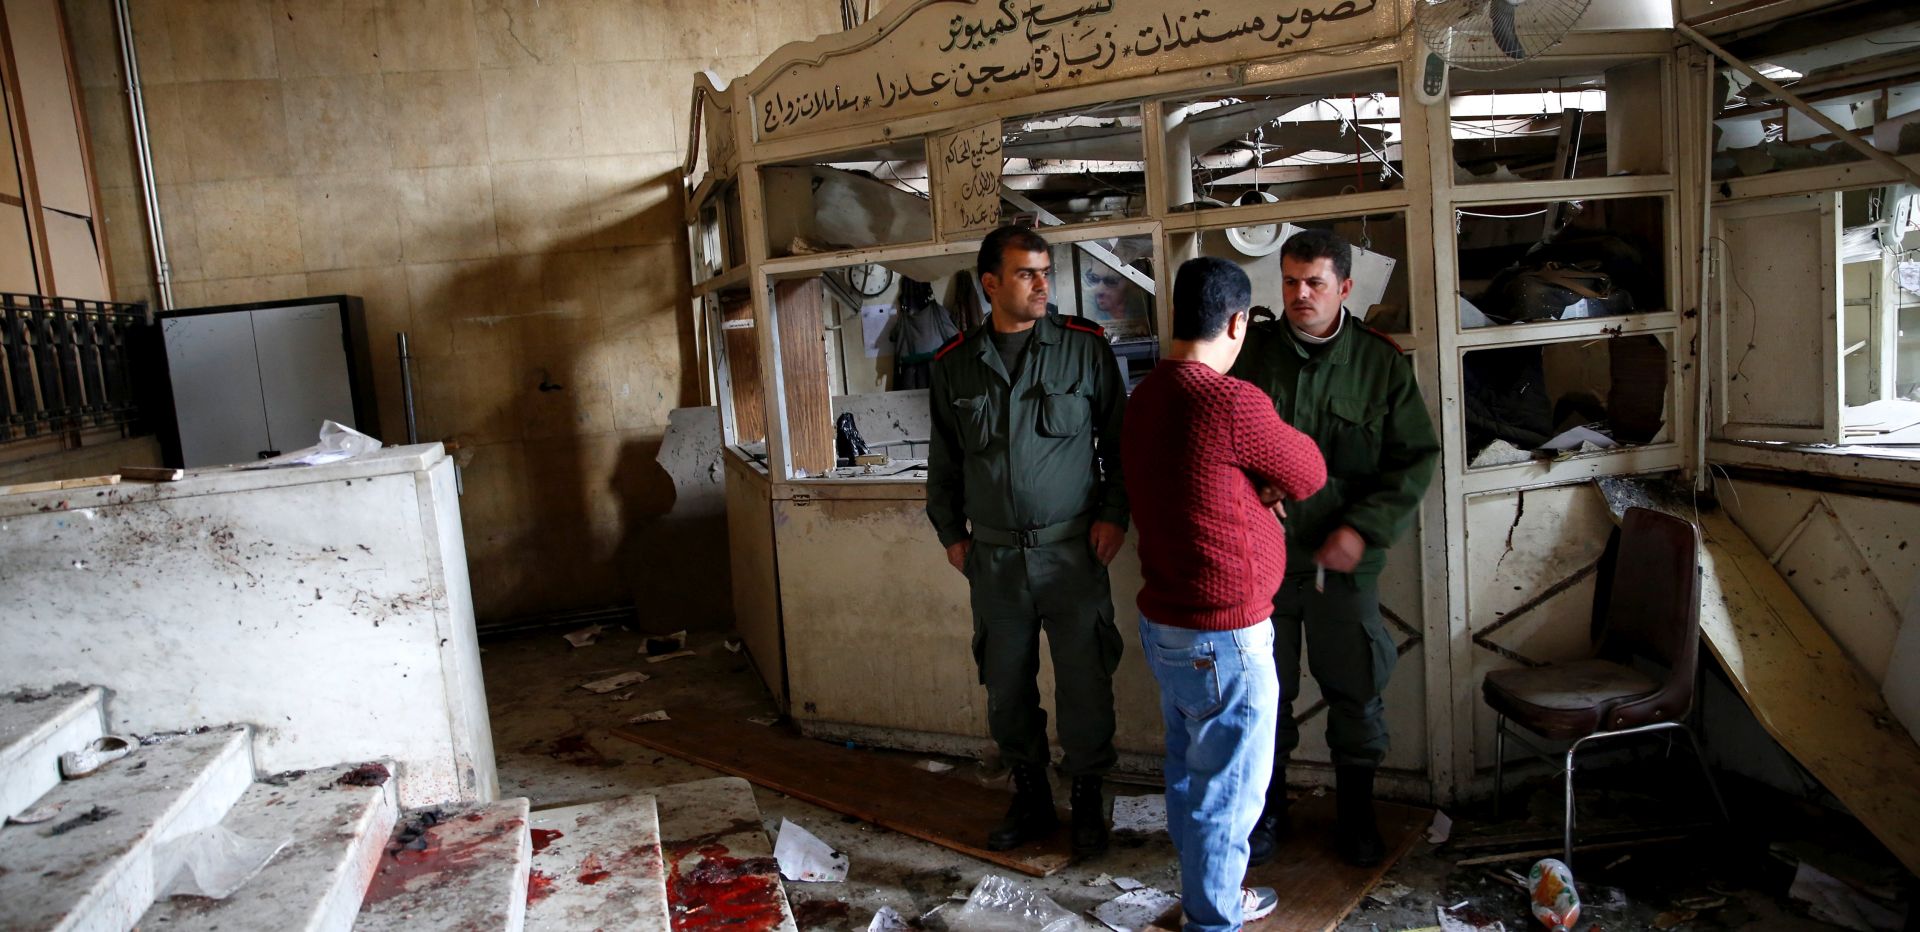 epa05849991 Security personnel stand near a blood stain at the Justice Palace following a suicide bombing in the Hamidiya district of Damascus, Syria, 15 March 2017. According to state-media reports, a suicide bomber attacked the Palace of Justice in the Hamidiya district of Damascus, killing at least 39 people.  EPA/YOUSSEF BADAWI ATTENTION EDITORS: PICTURE CONTAINS GRAPHIC CONTENT